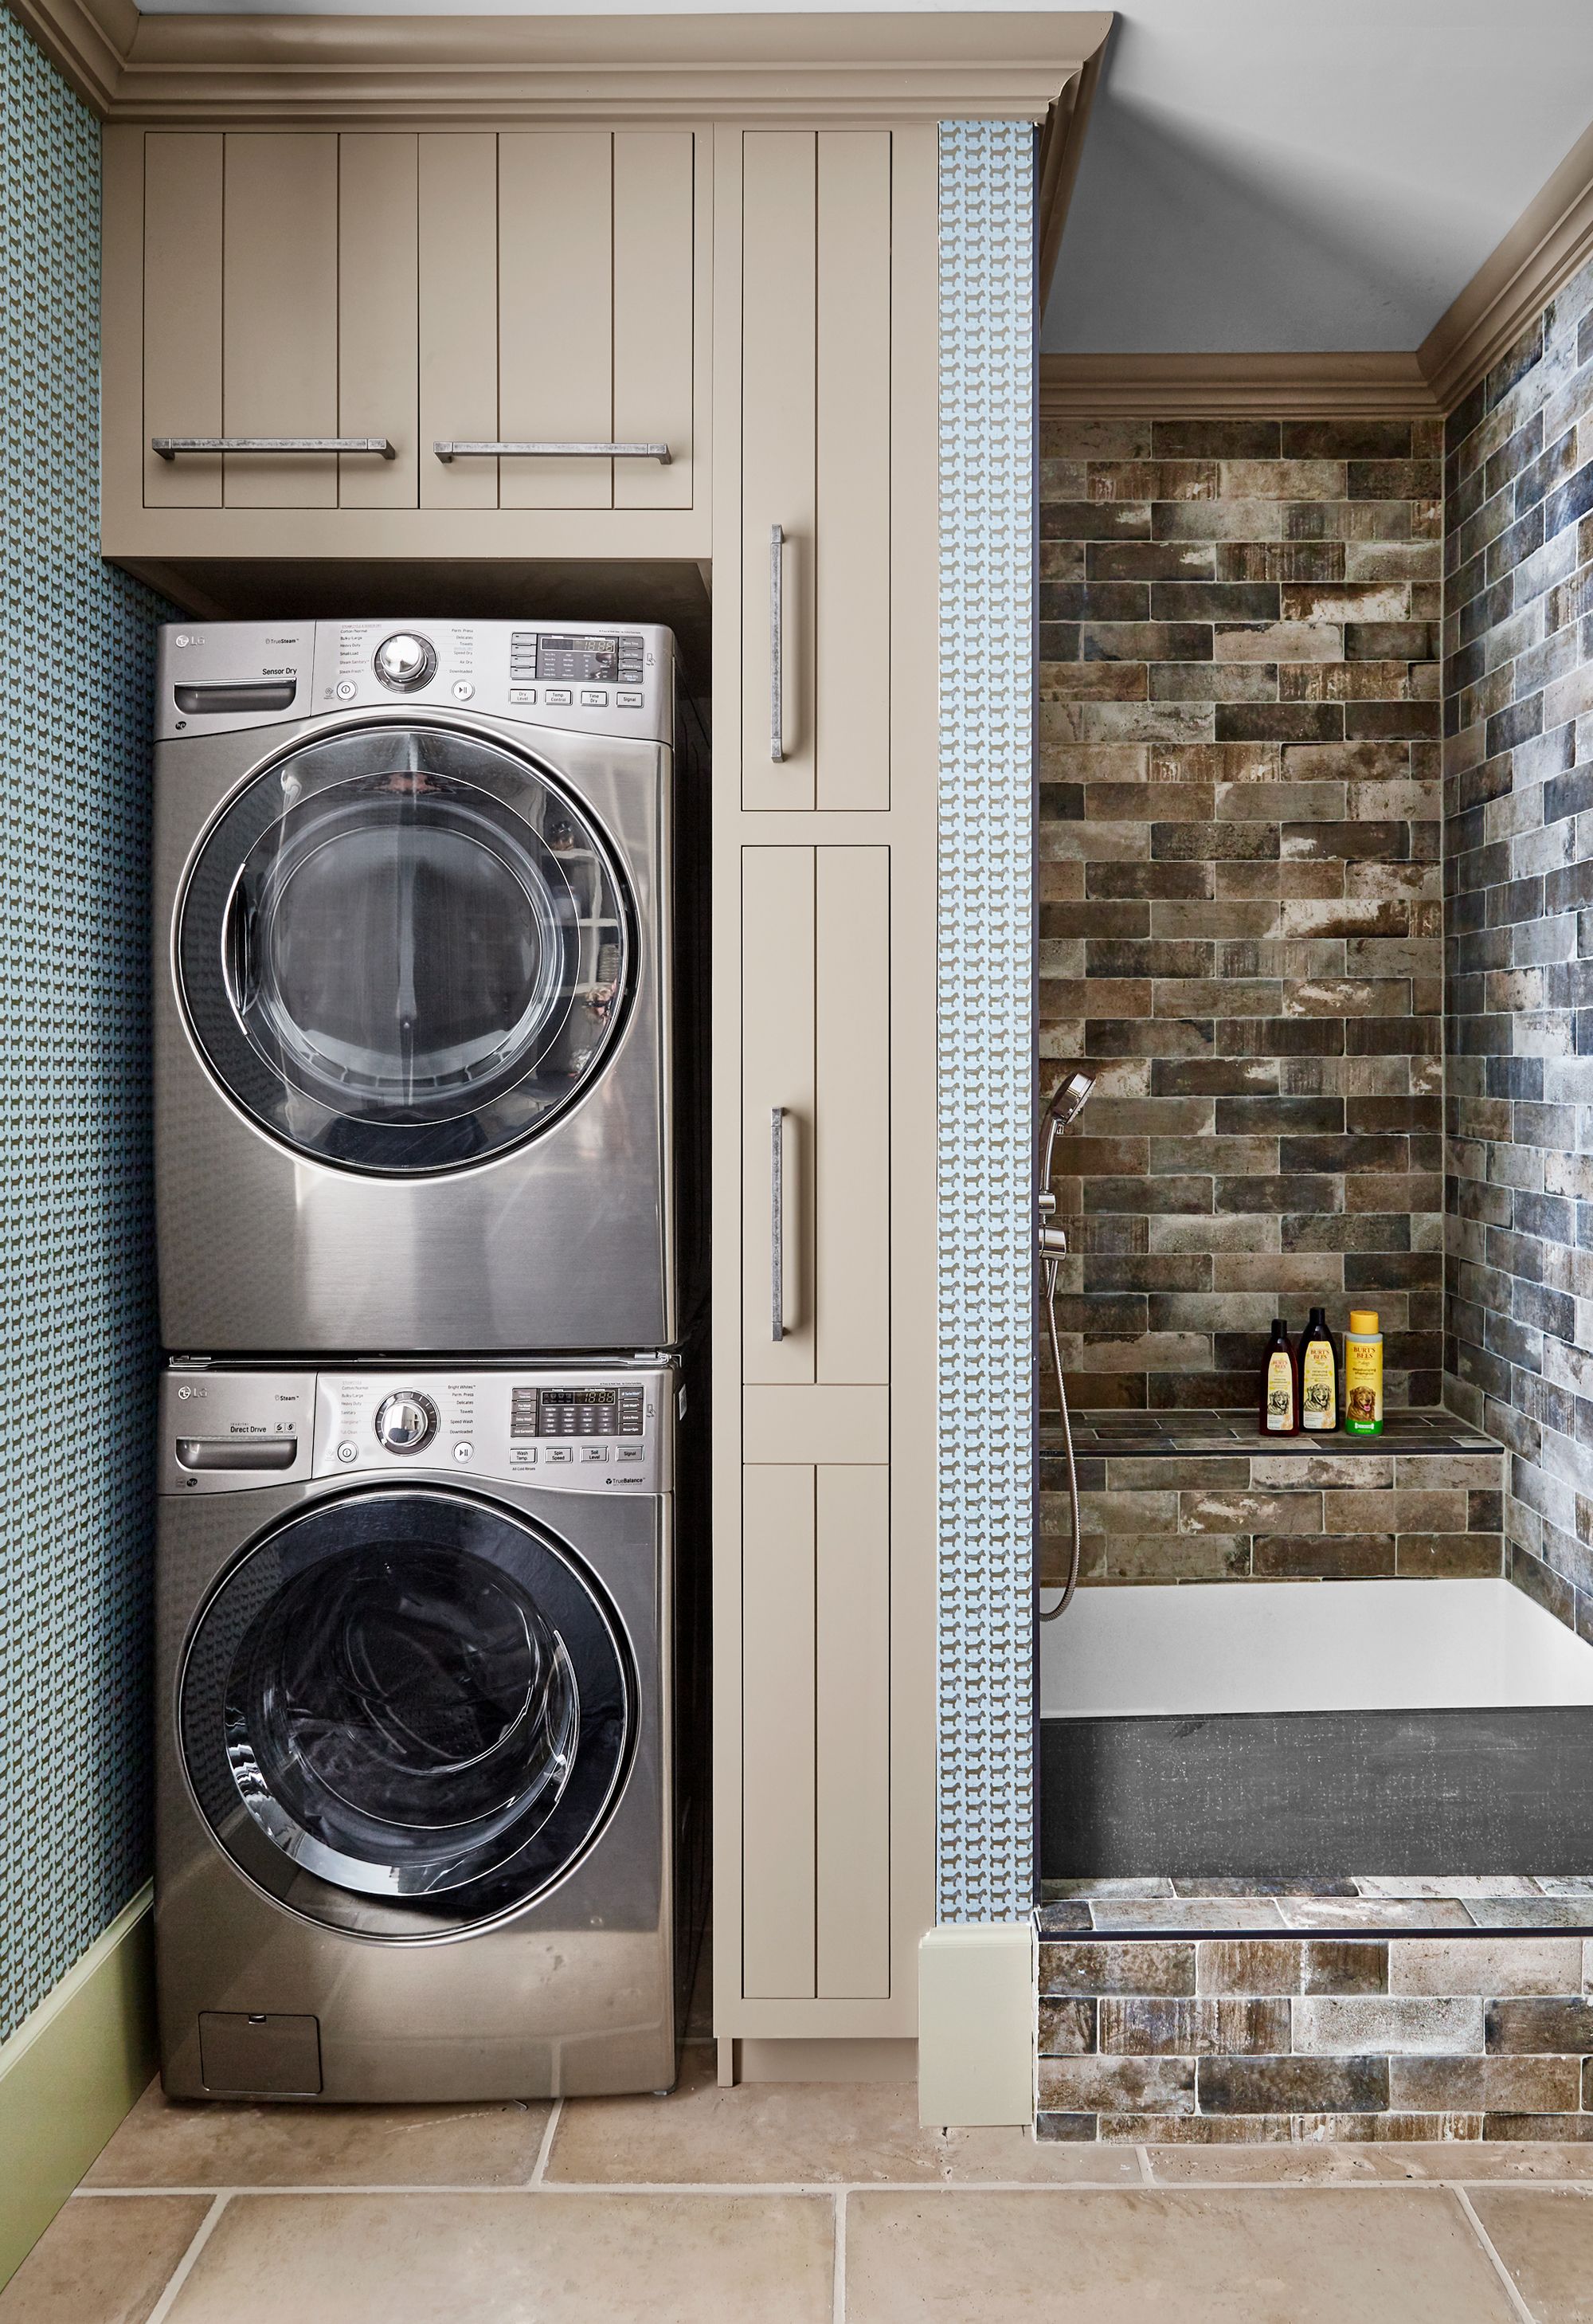 Small laundry rooms - berysmooth